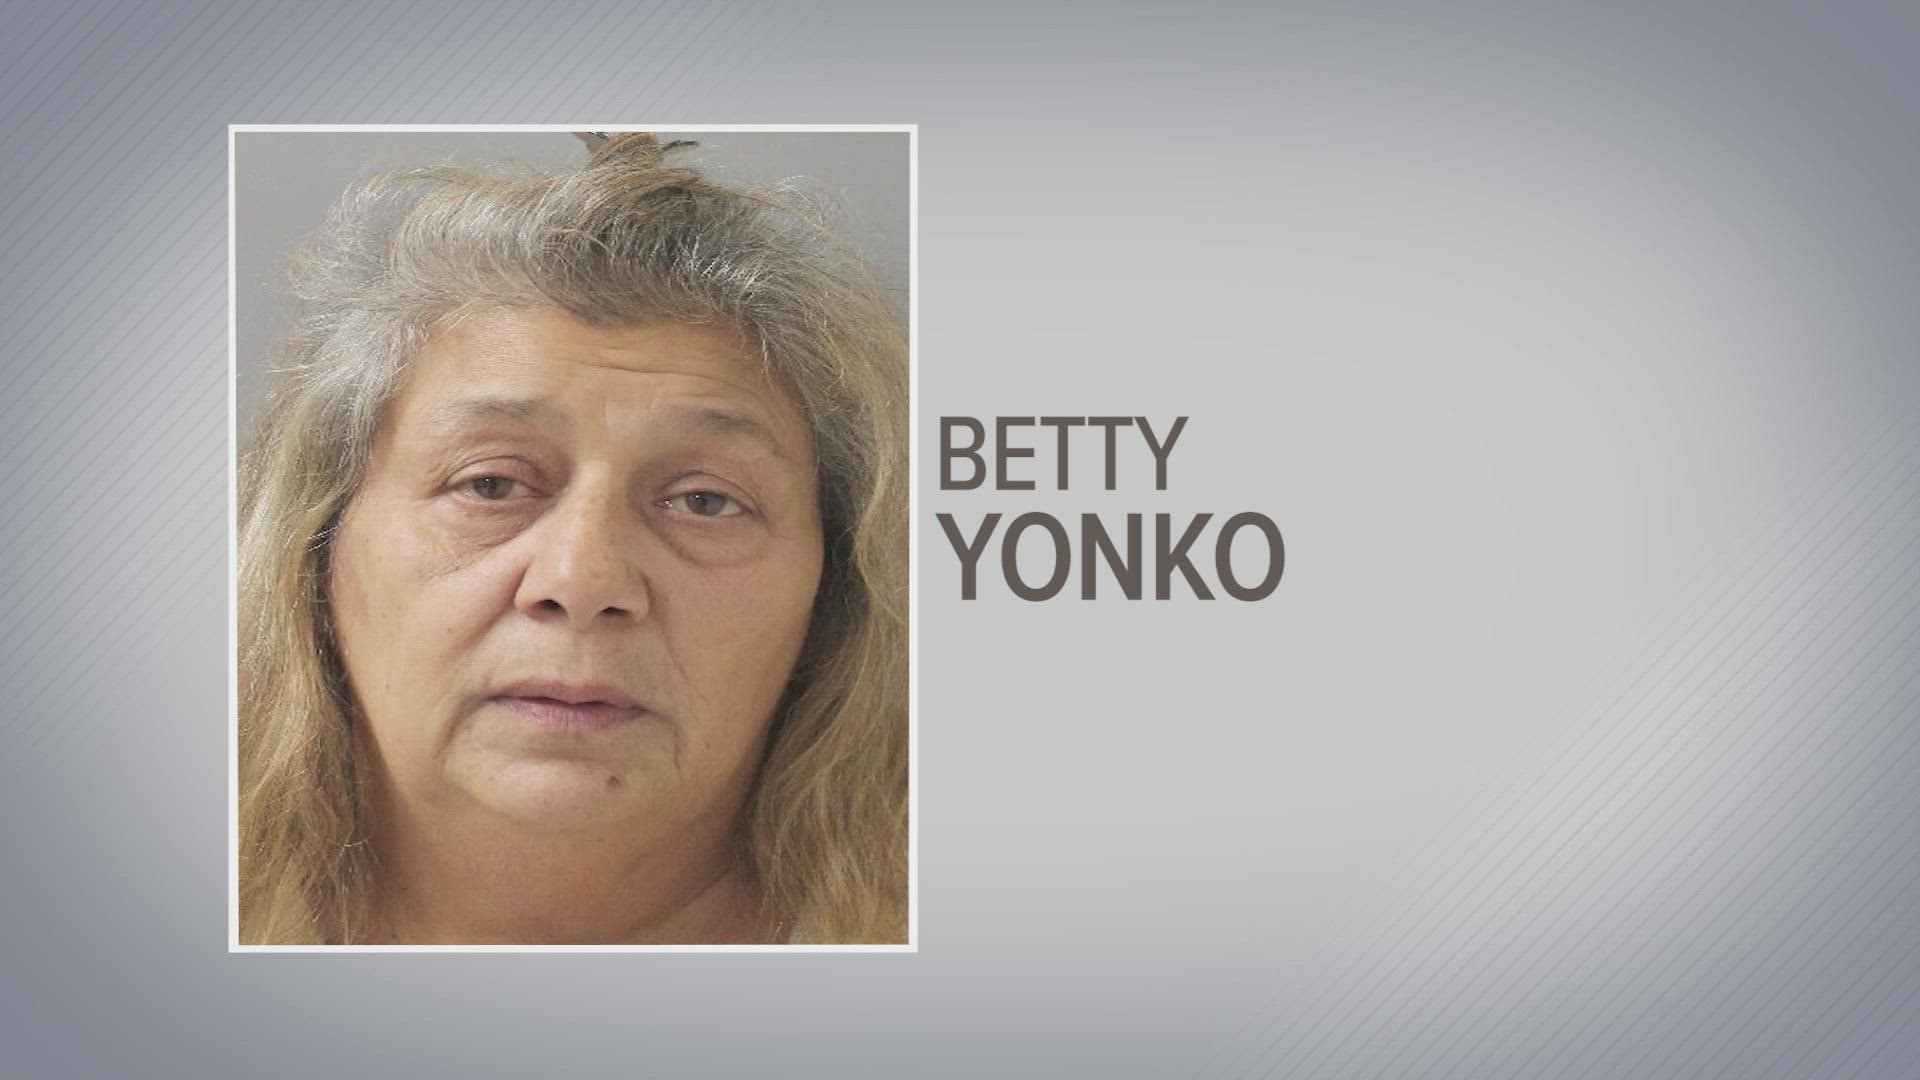 Police say Betty Yonko has a criminal history involving stealing from the elderly and jumping bail.